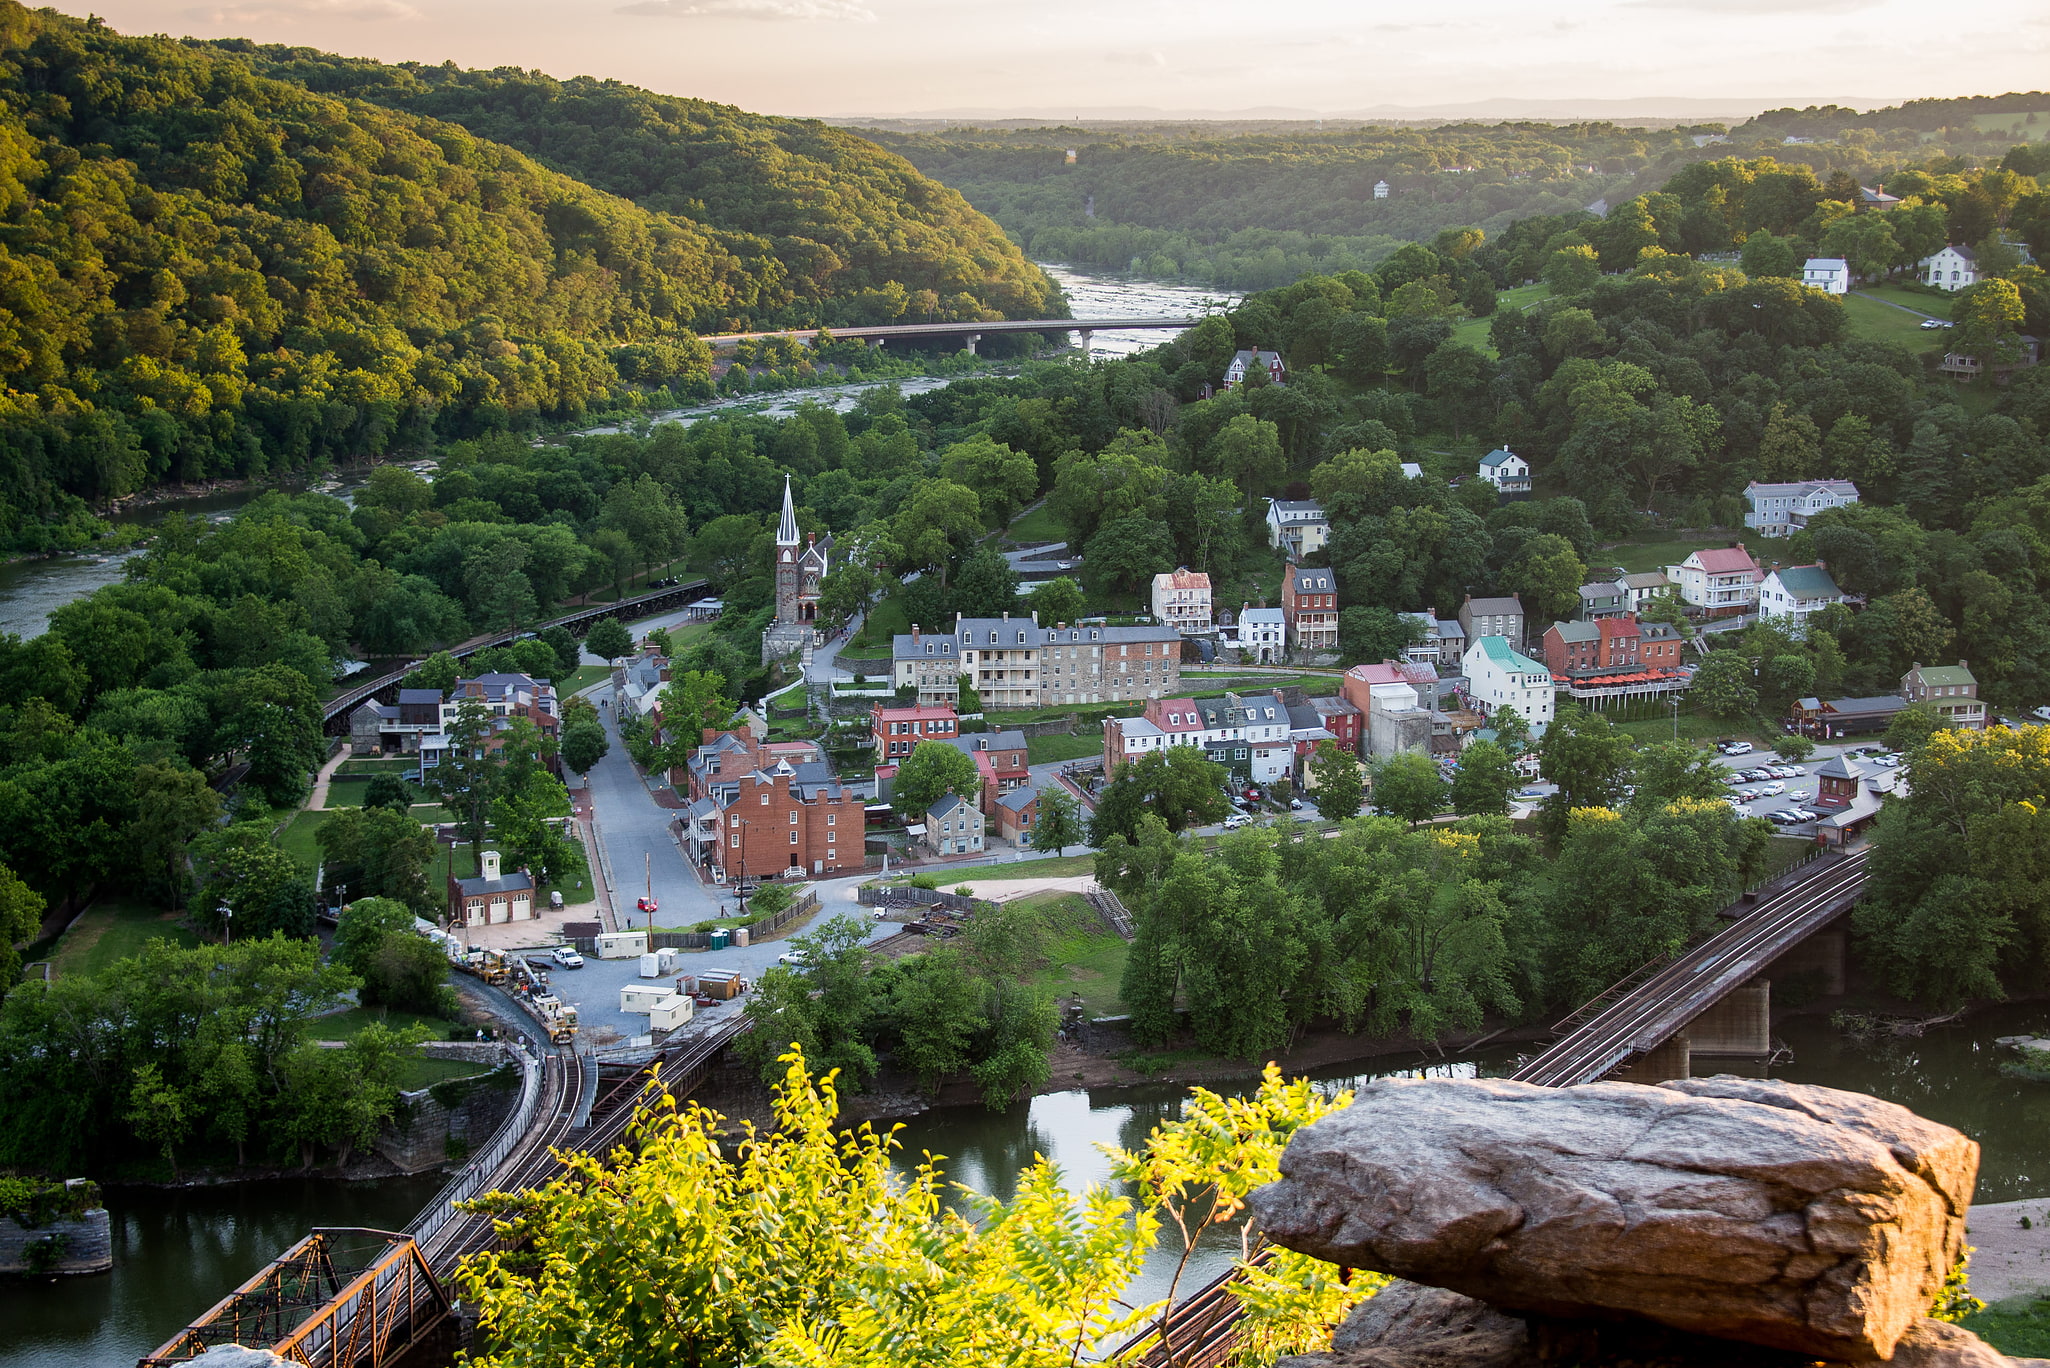 Harpers Ferry, Stany Zjednoczone